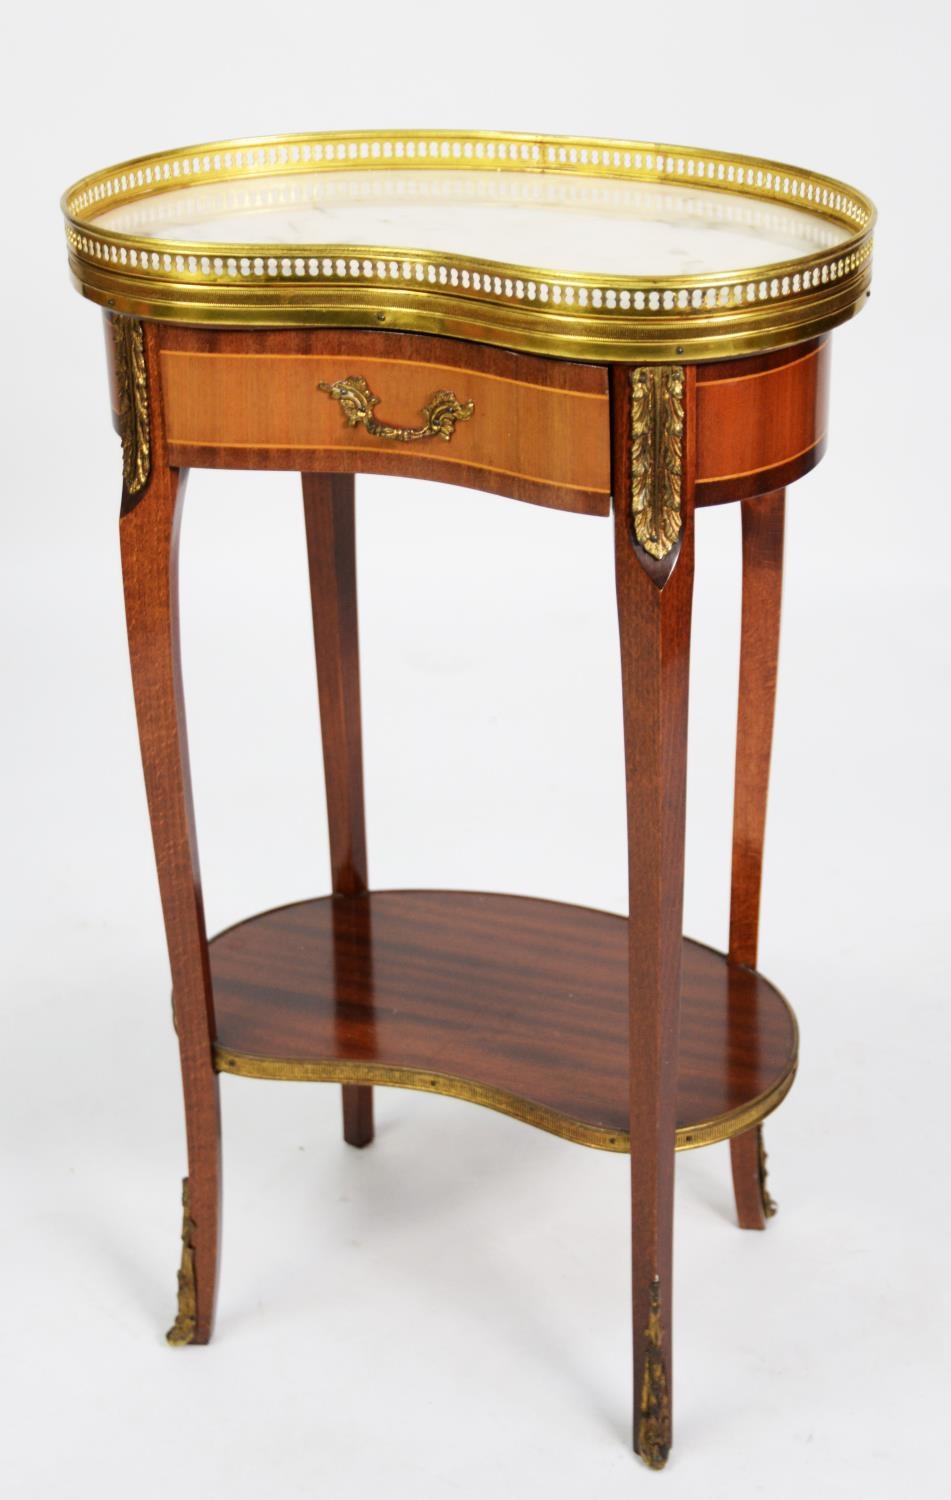 LOUIS XVI STYLE MAHOGANY AN GILT METAL MOUNTED OCCASIONAL TABLE WITH WHITE VEINED MARBLE TOP, kidney - Image 3 of 3